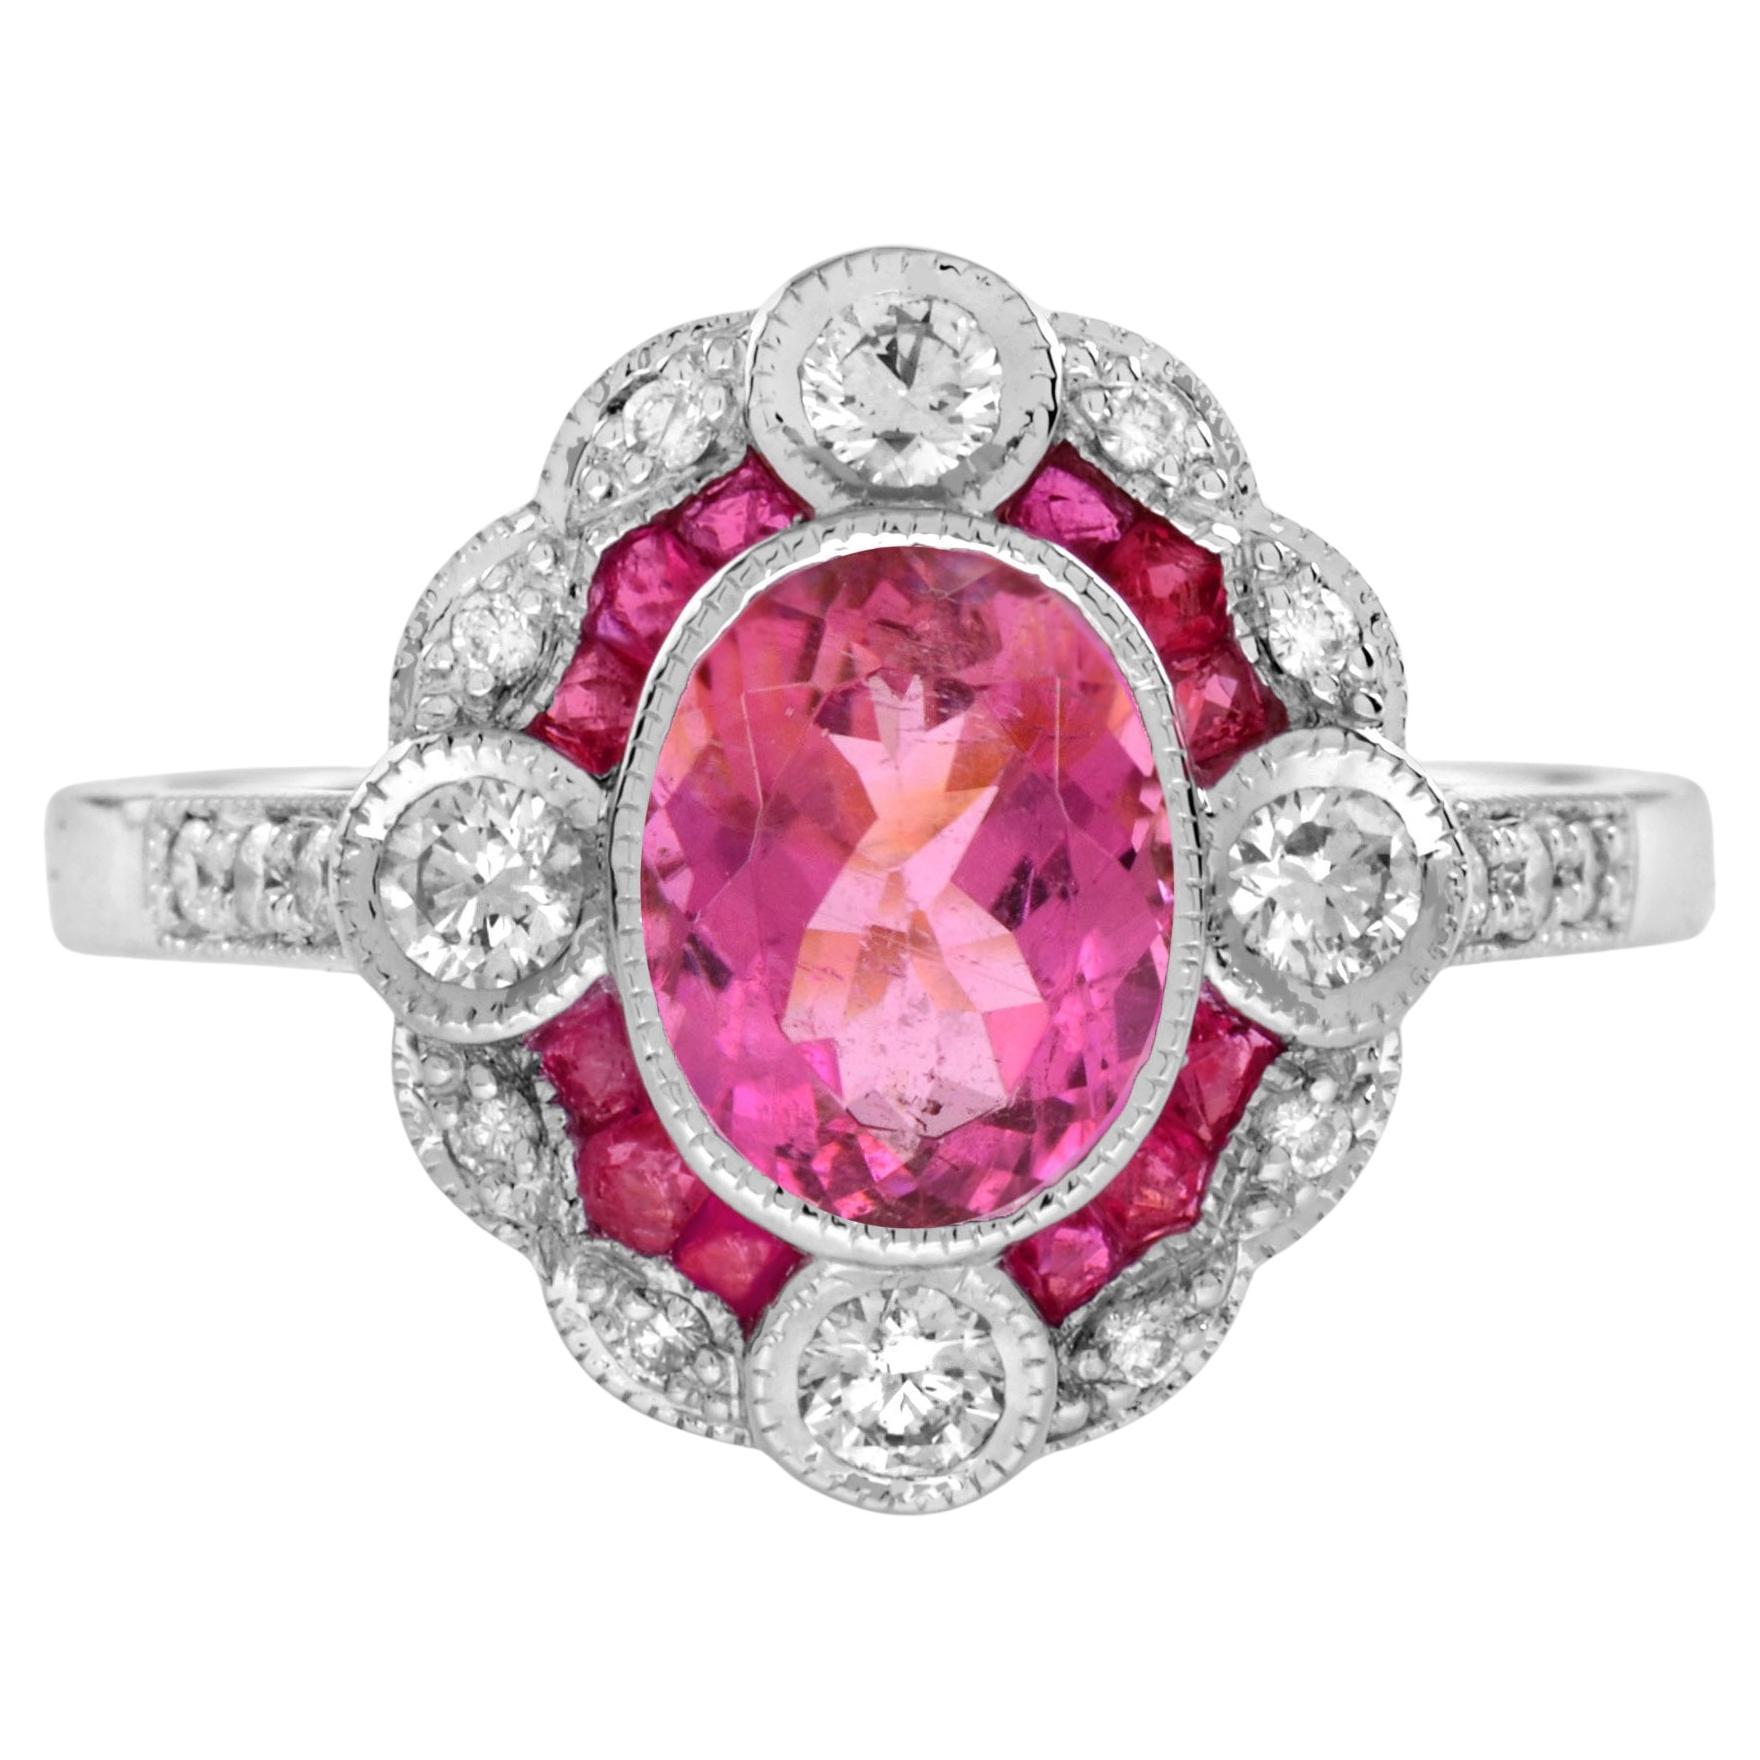 Pink Tourmaline Ruby Diamond Art Deco Style Engagement Ring in 18K White Gold For Sale